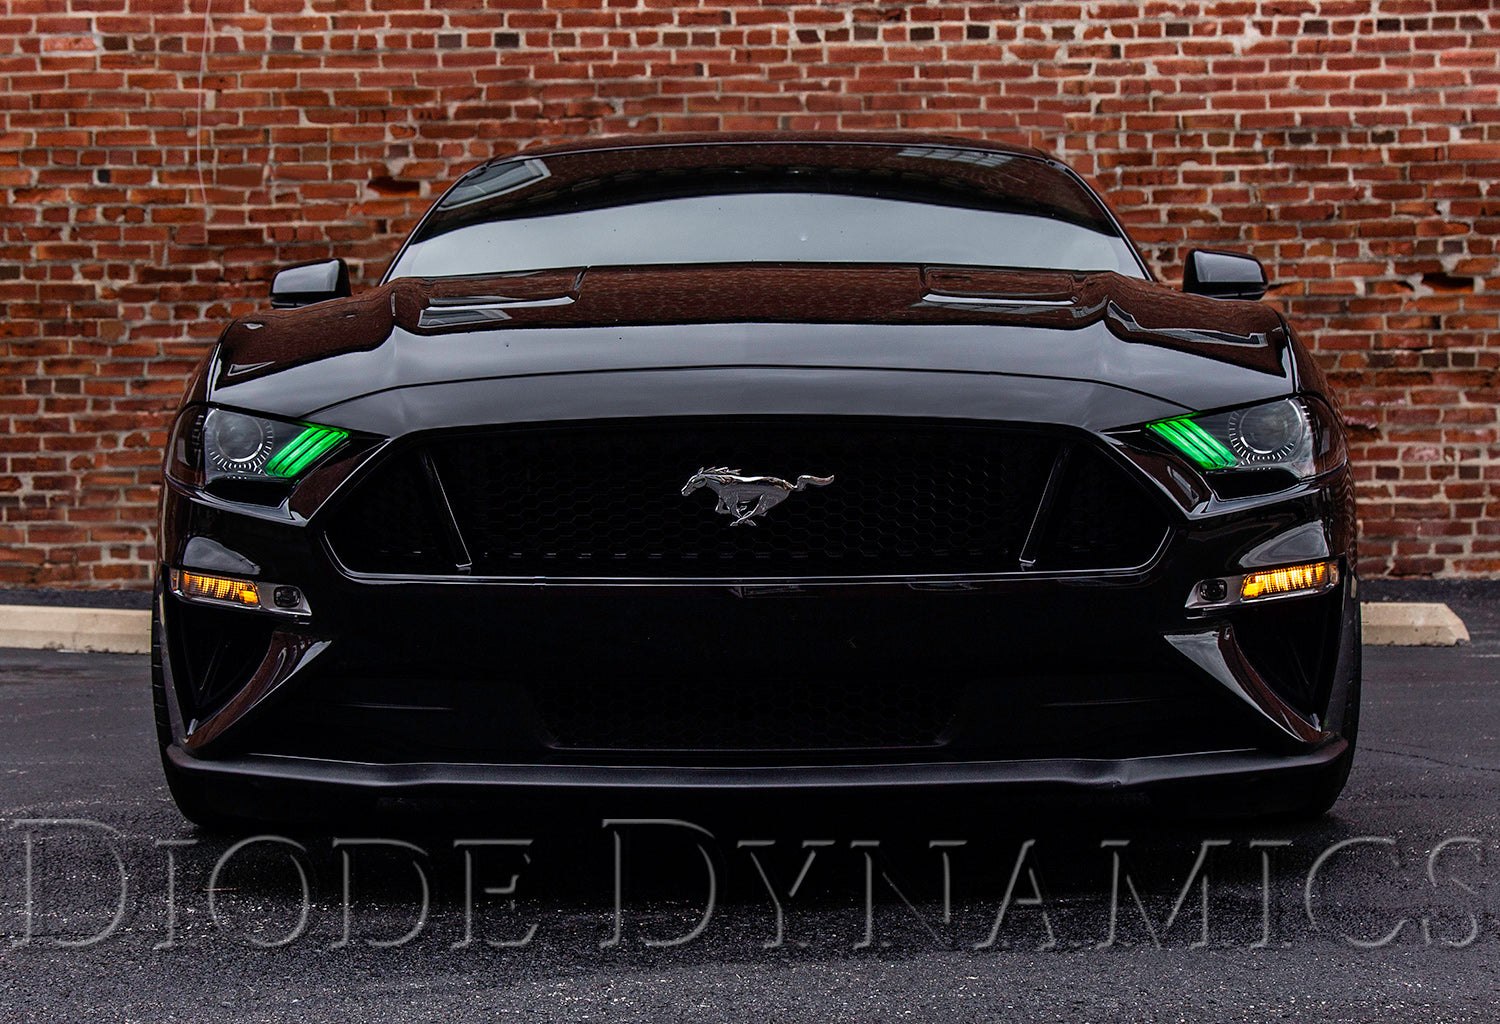 RGBW DRL LED Boards for 2018-2021 Ford Mustang